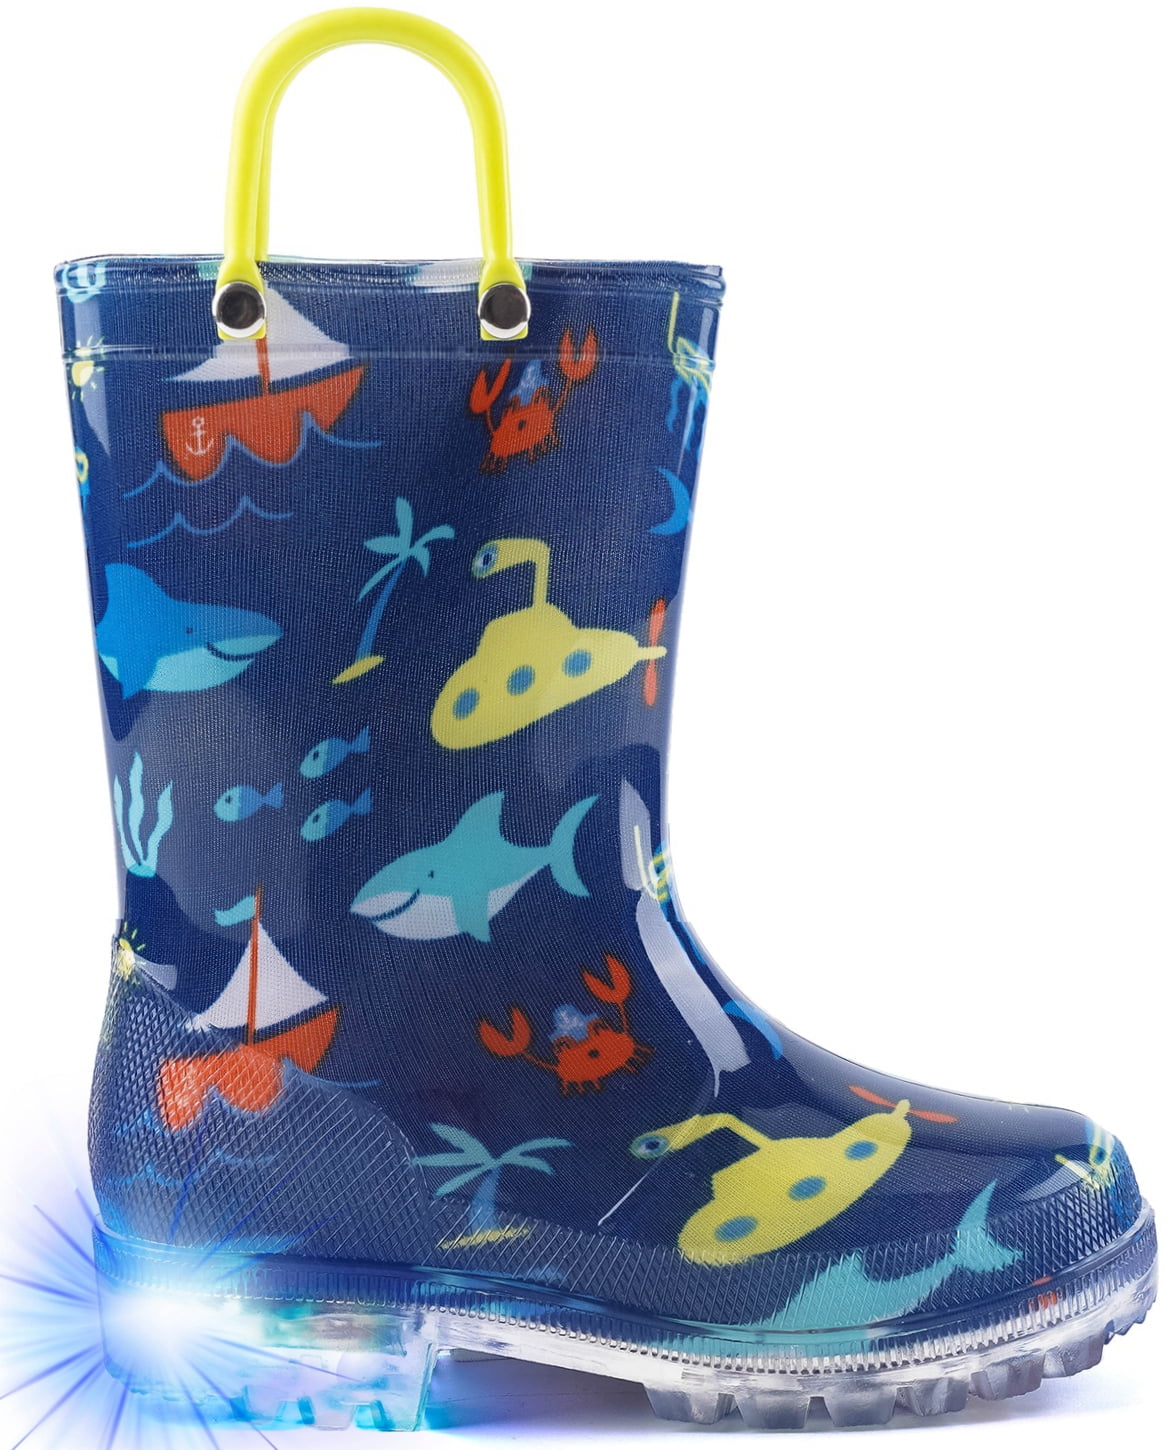 Outee Toddler Kids Adorable Printed Light Up Rain Boots 